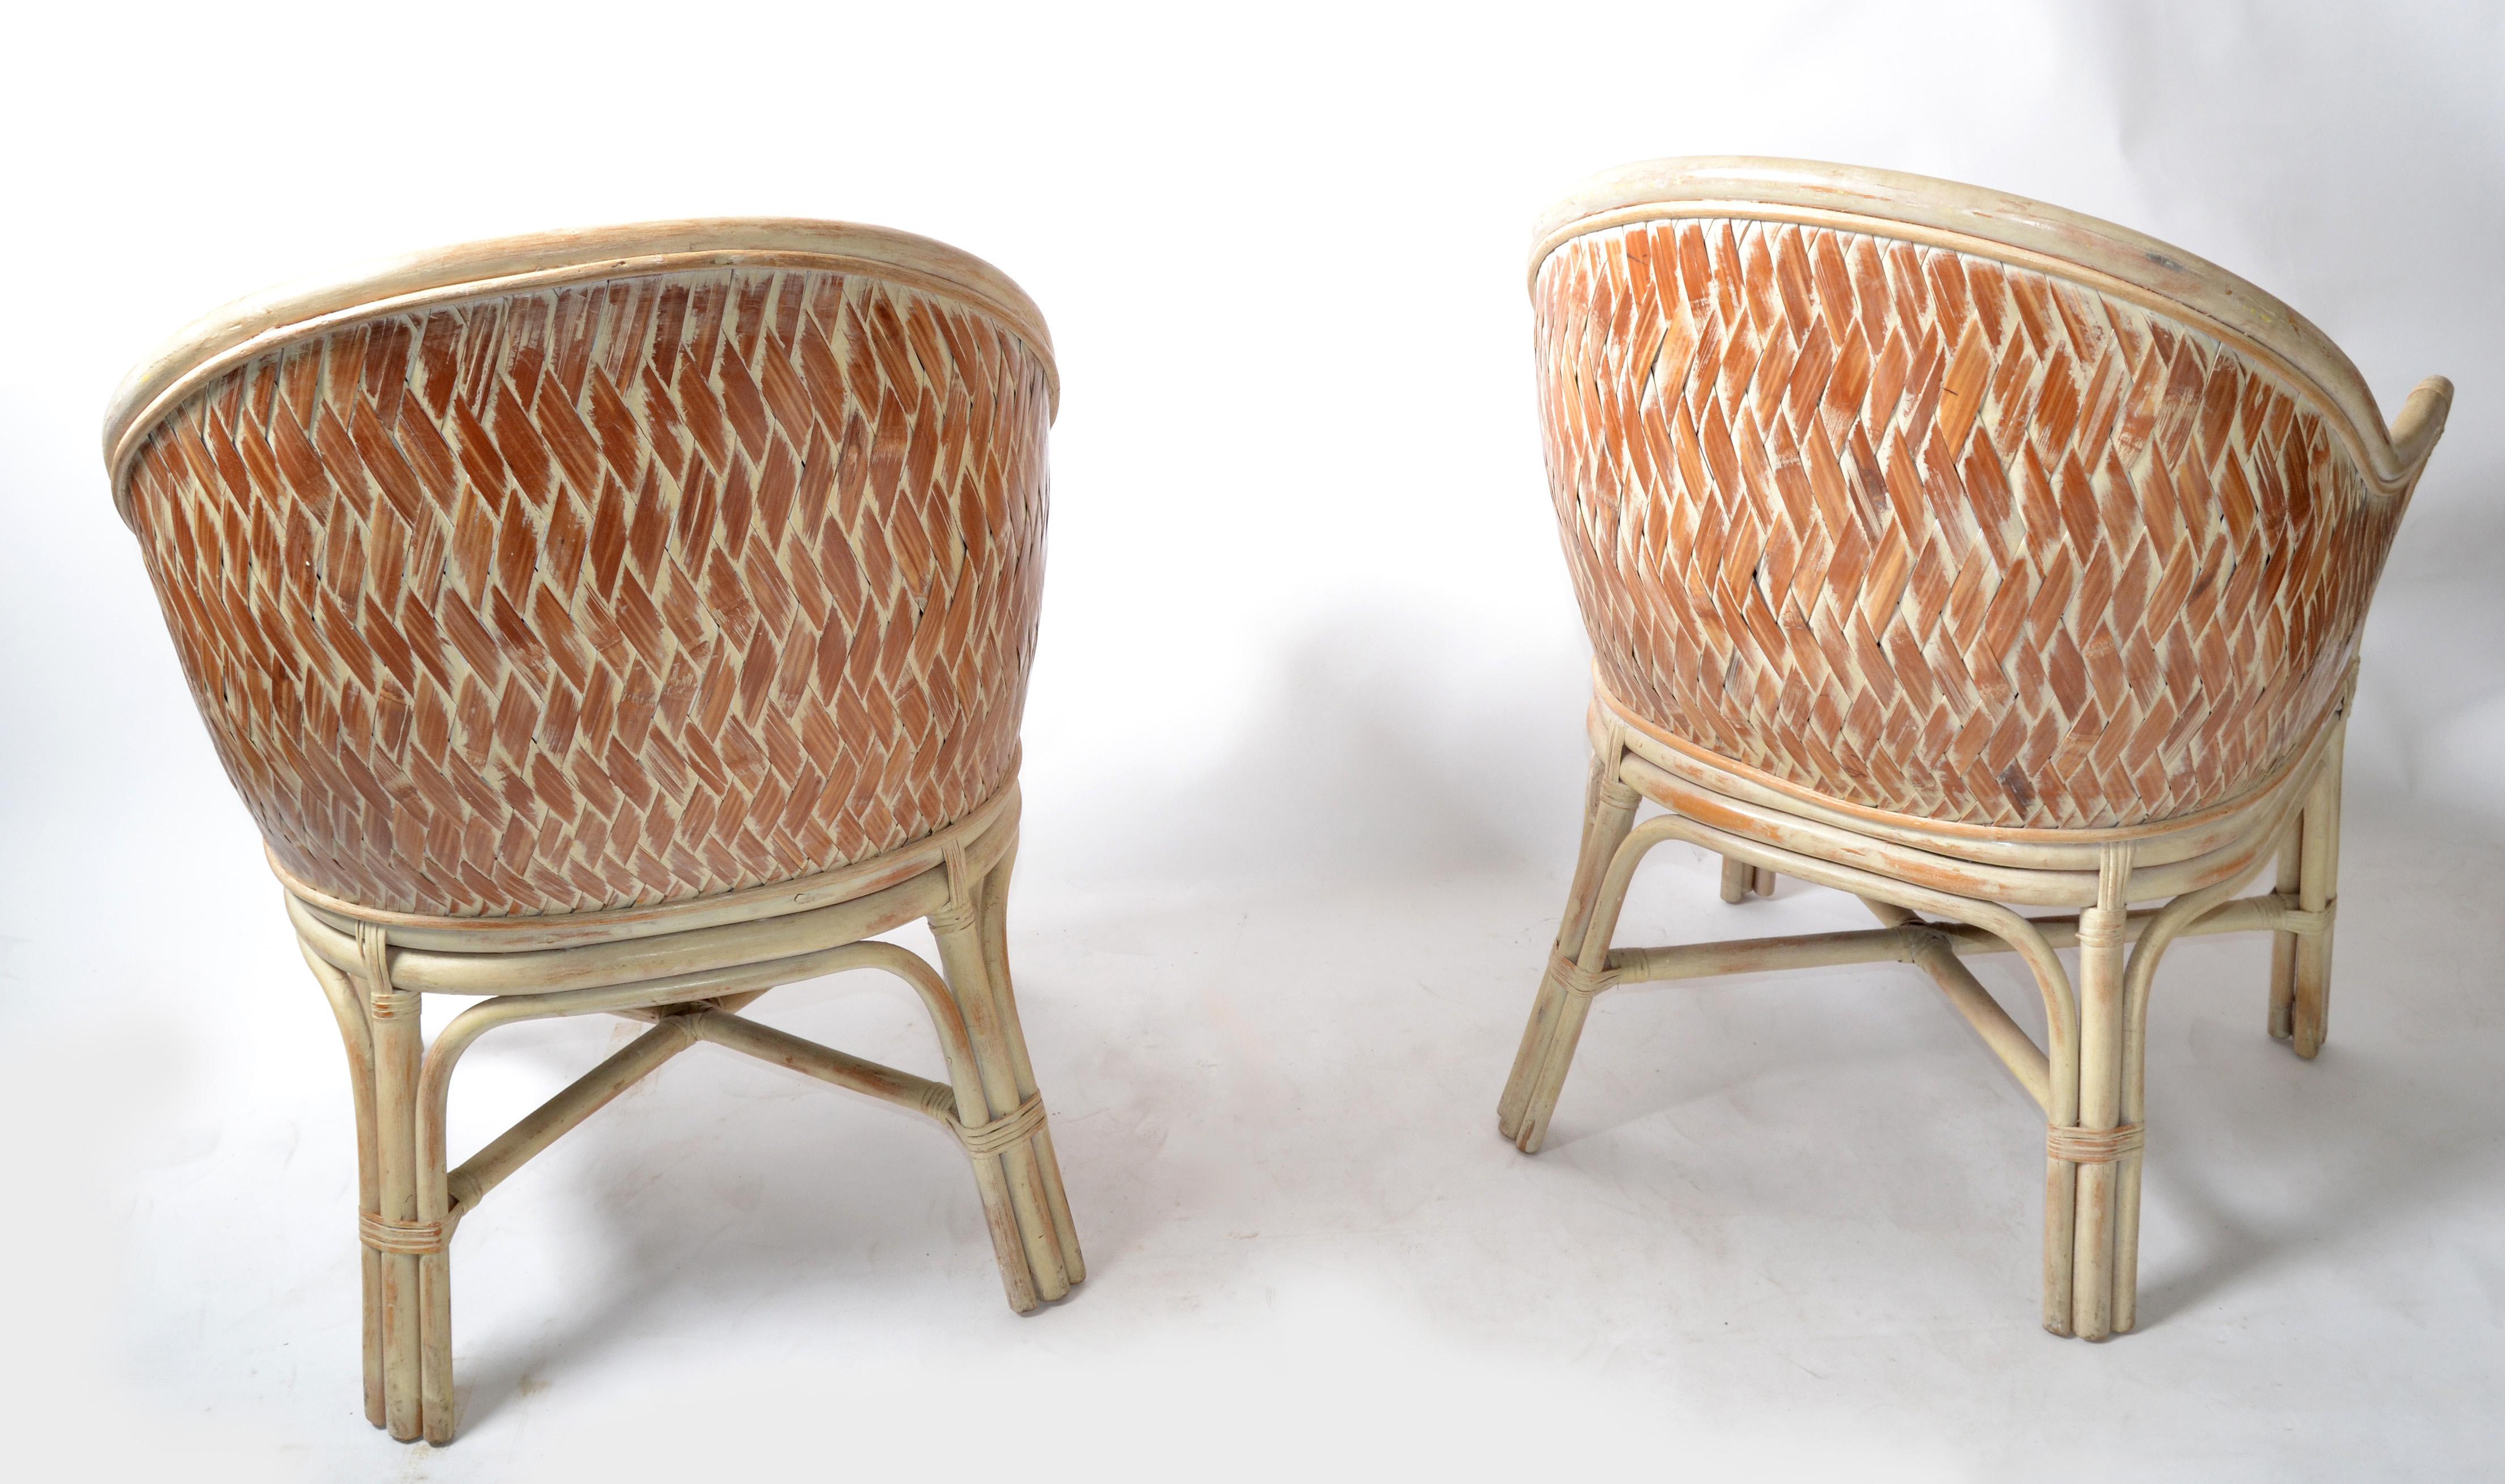 Pair, Mid-Century Modern Bamboo & Cane Armchair Orange Striped Upholstery, 1970 For Sale 7